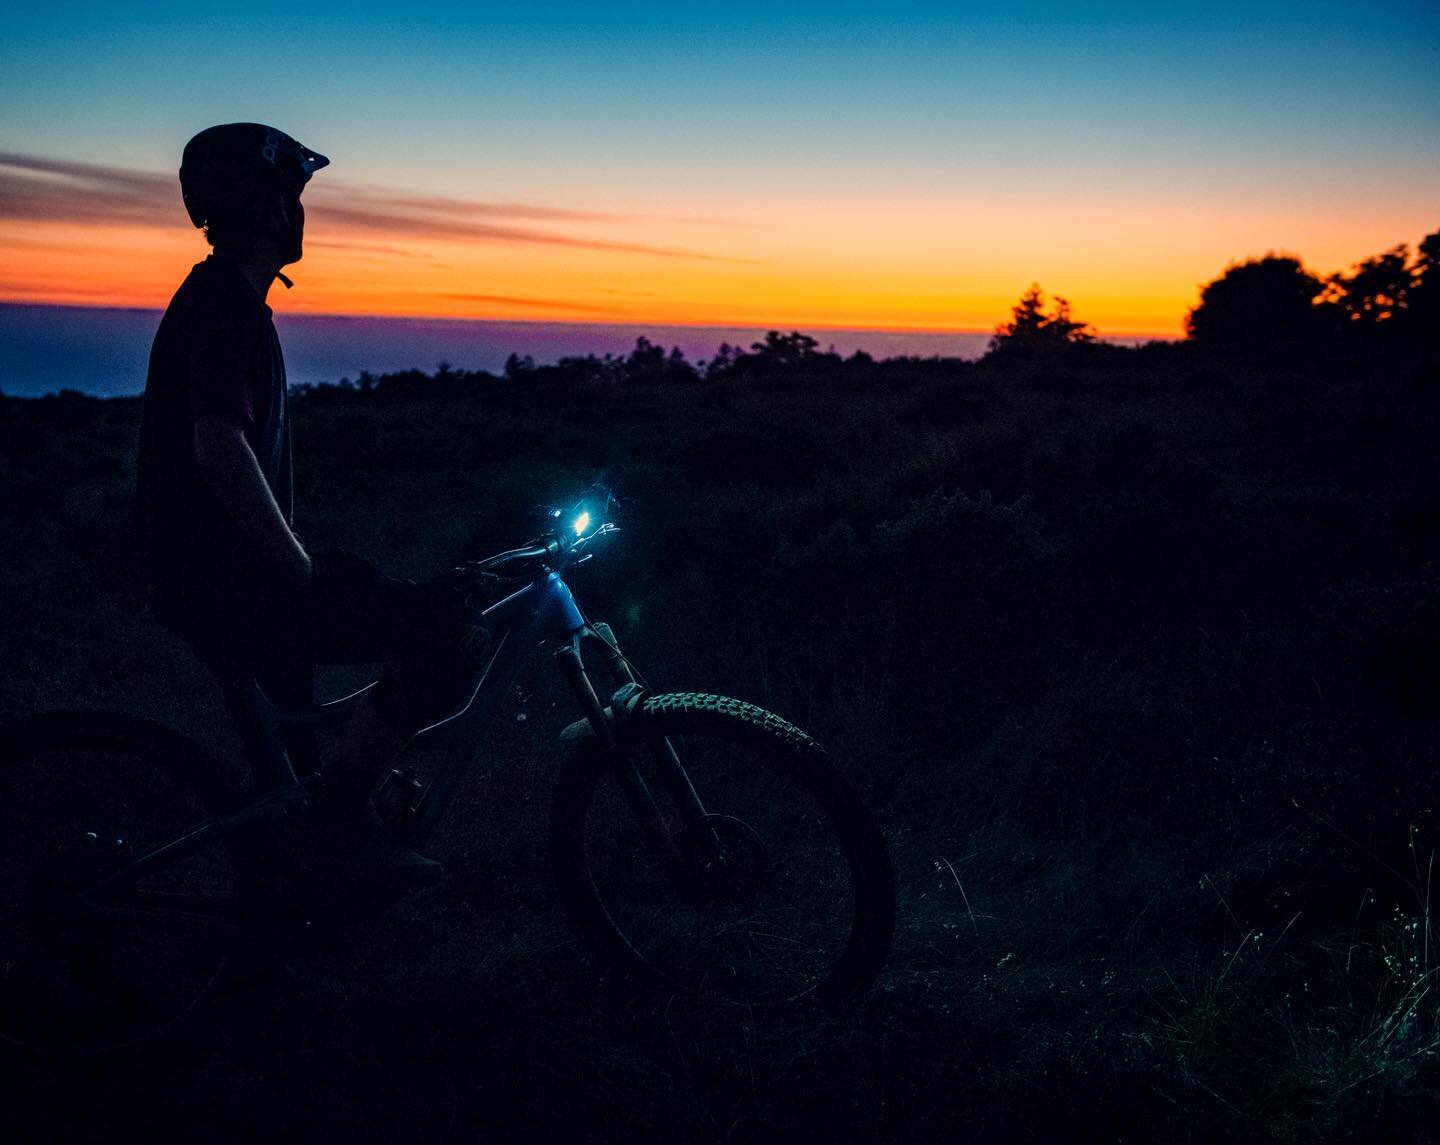 End of the Light.
.
.
.
#mtb #ride #sunset #vibrant #color #ride #shred #bike #dirt #ocean #vista #view